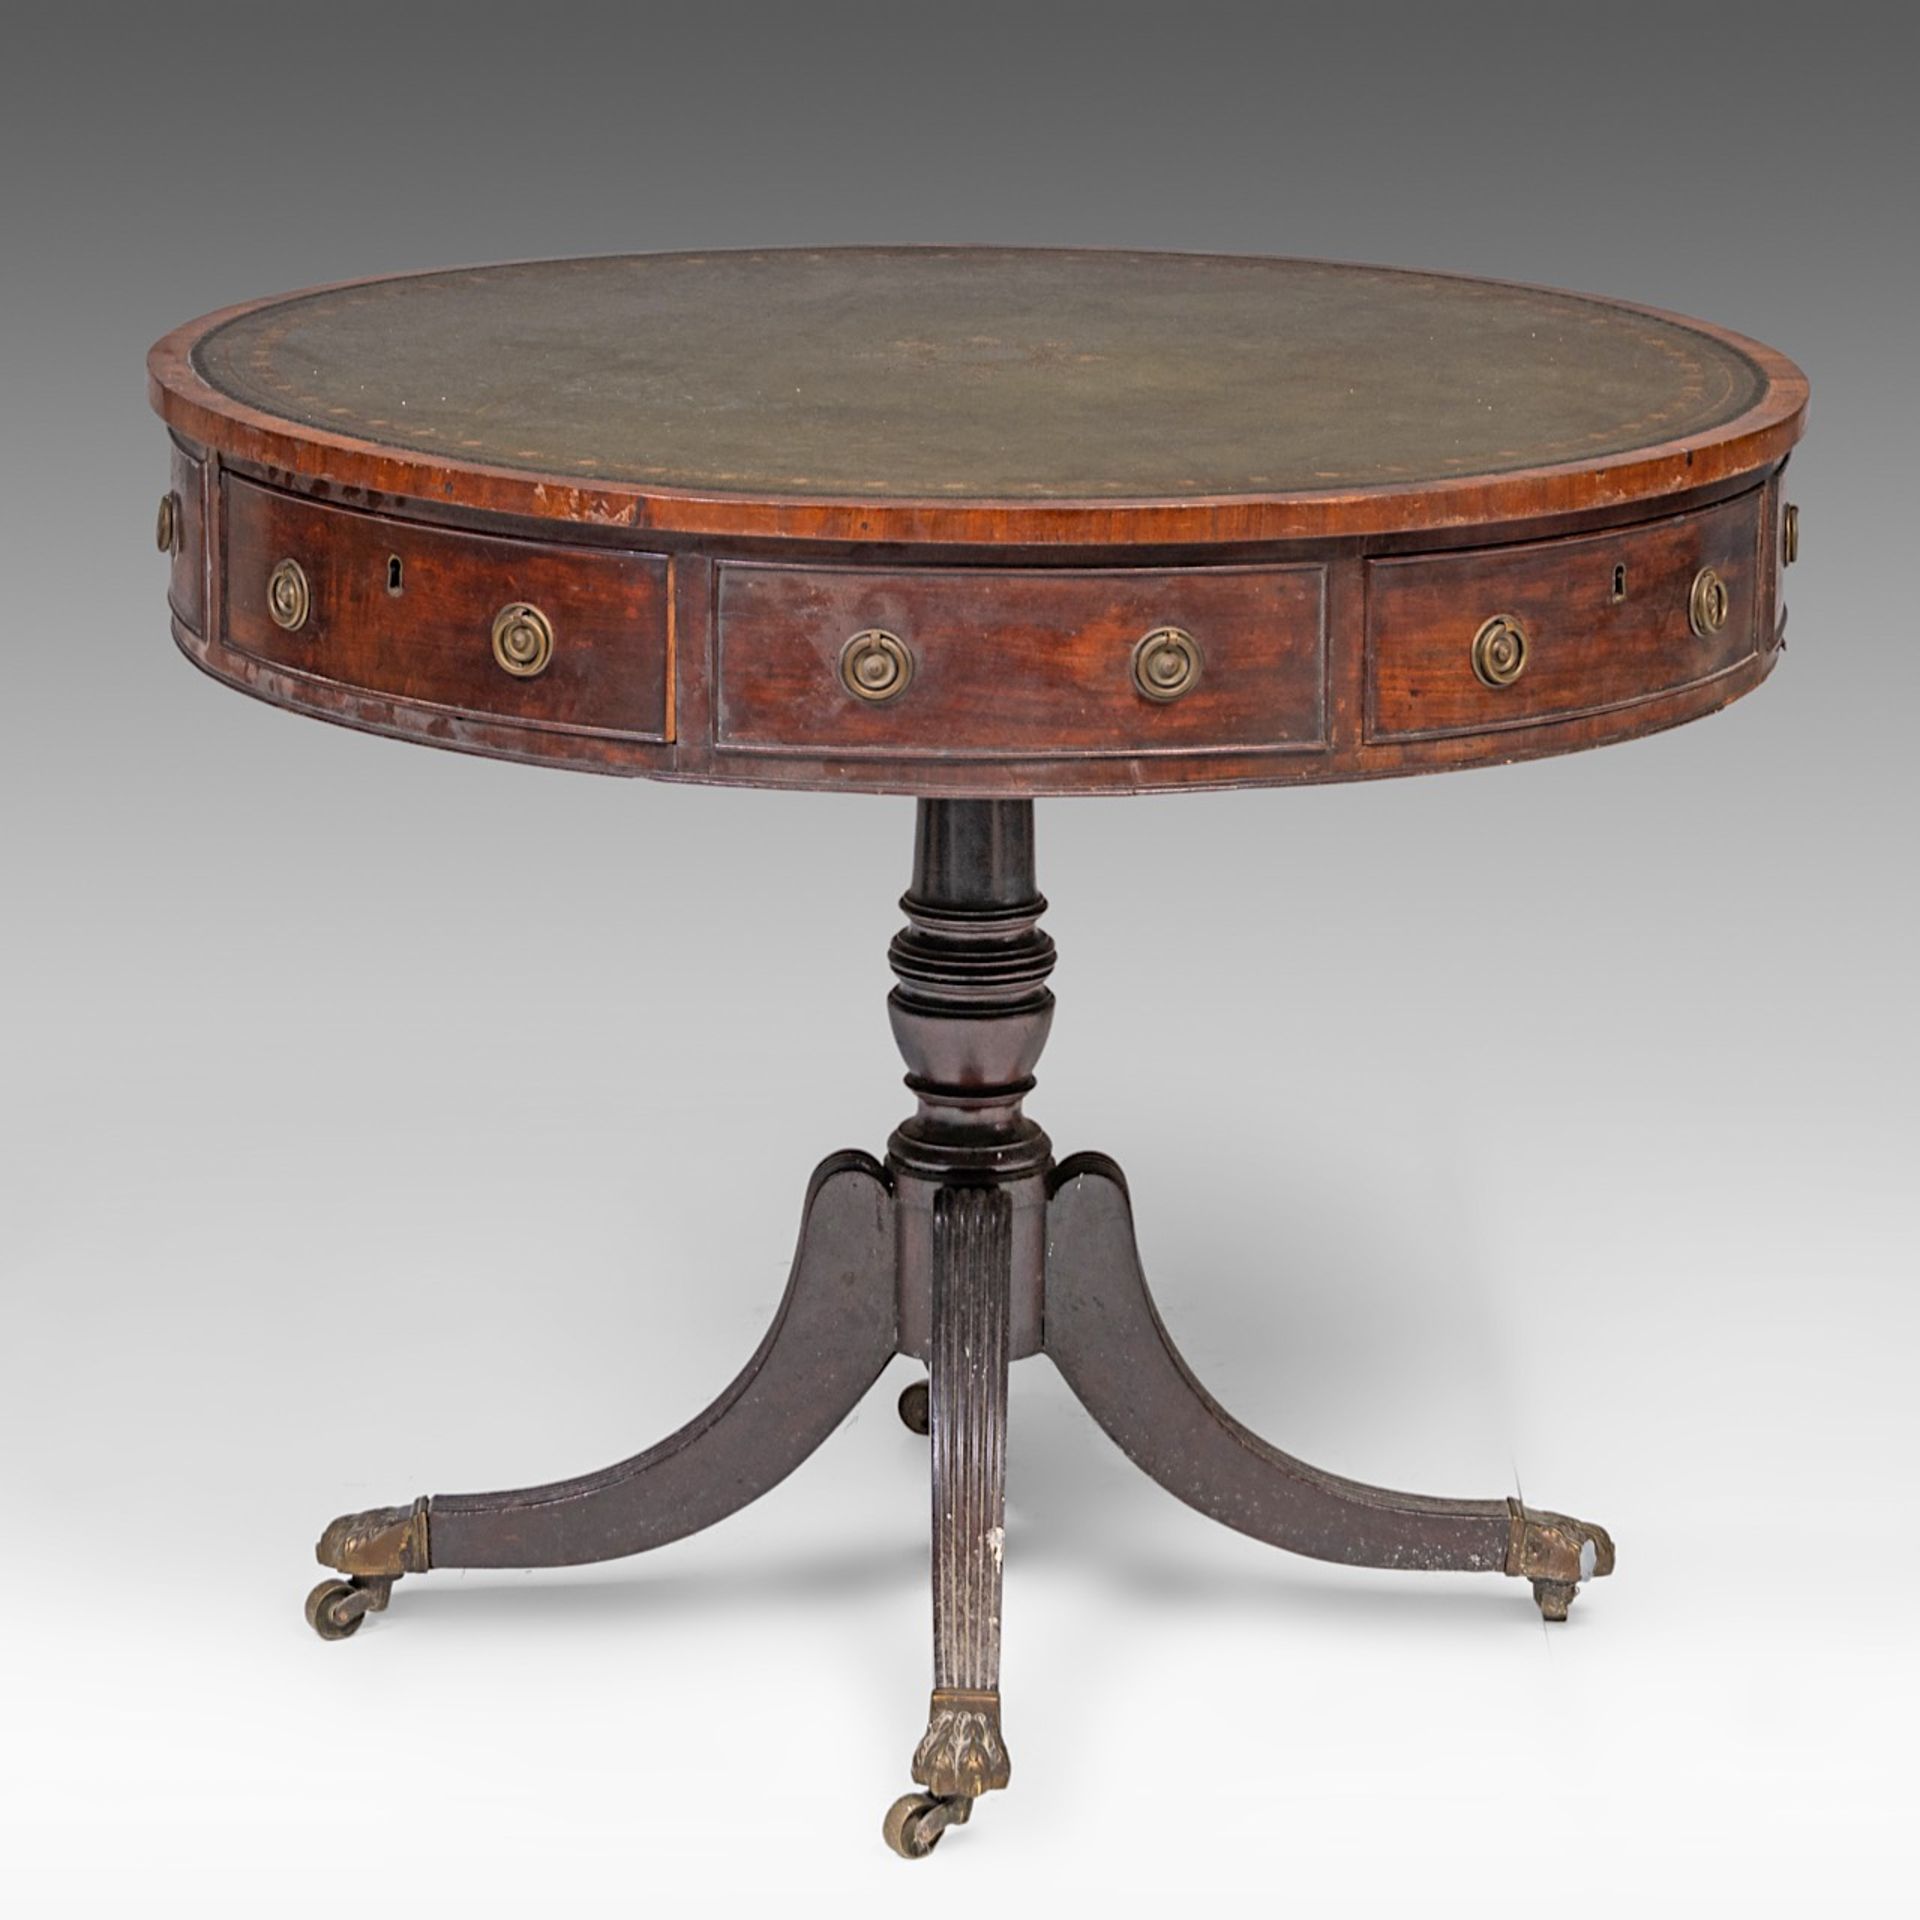 An English revolving drum table, marked with a crowned WR, ca. 1800, H 74 cm - dia 91 cm - Image 3 of 9